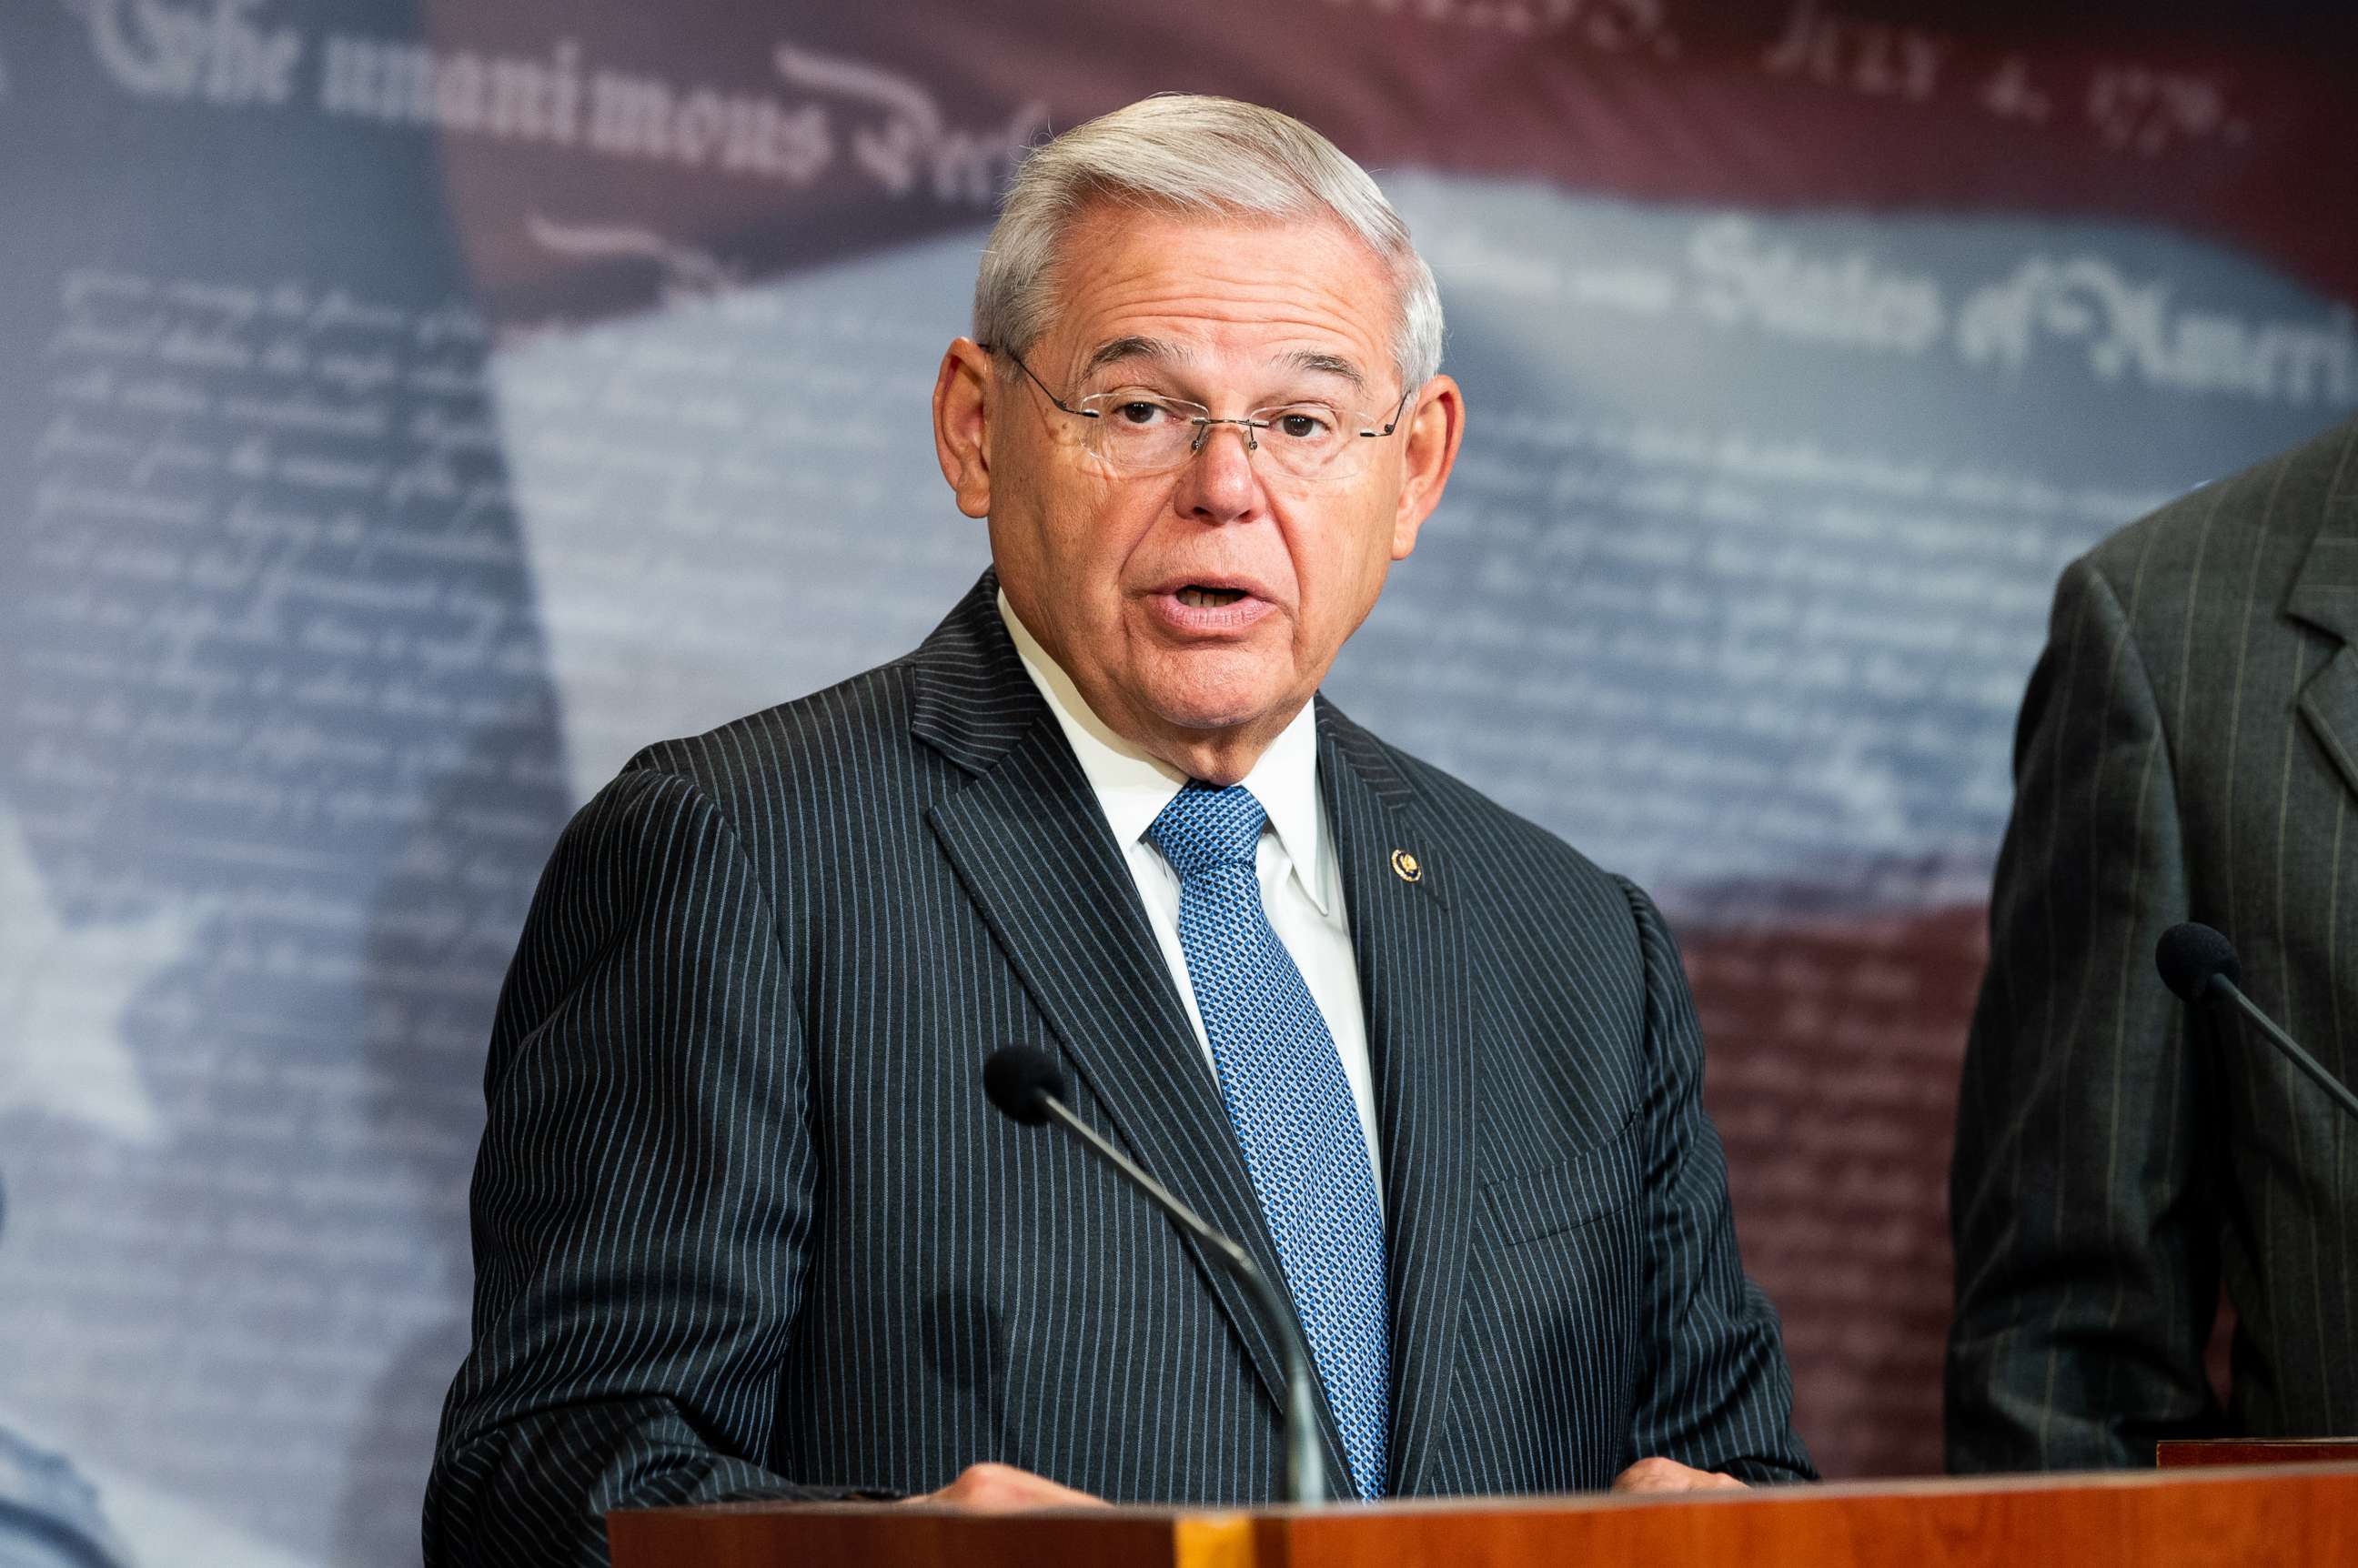 PHOTO: U.S. Senator Bob Menendez speaks during a press conference to advocate for the Save Our Seas 2.0 Act at the US Capitol in Washington, DC.